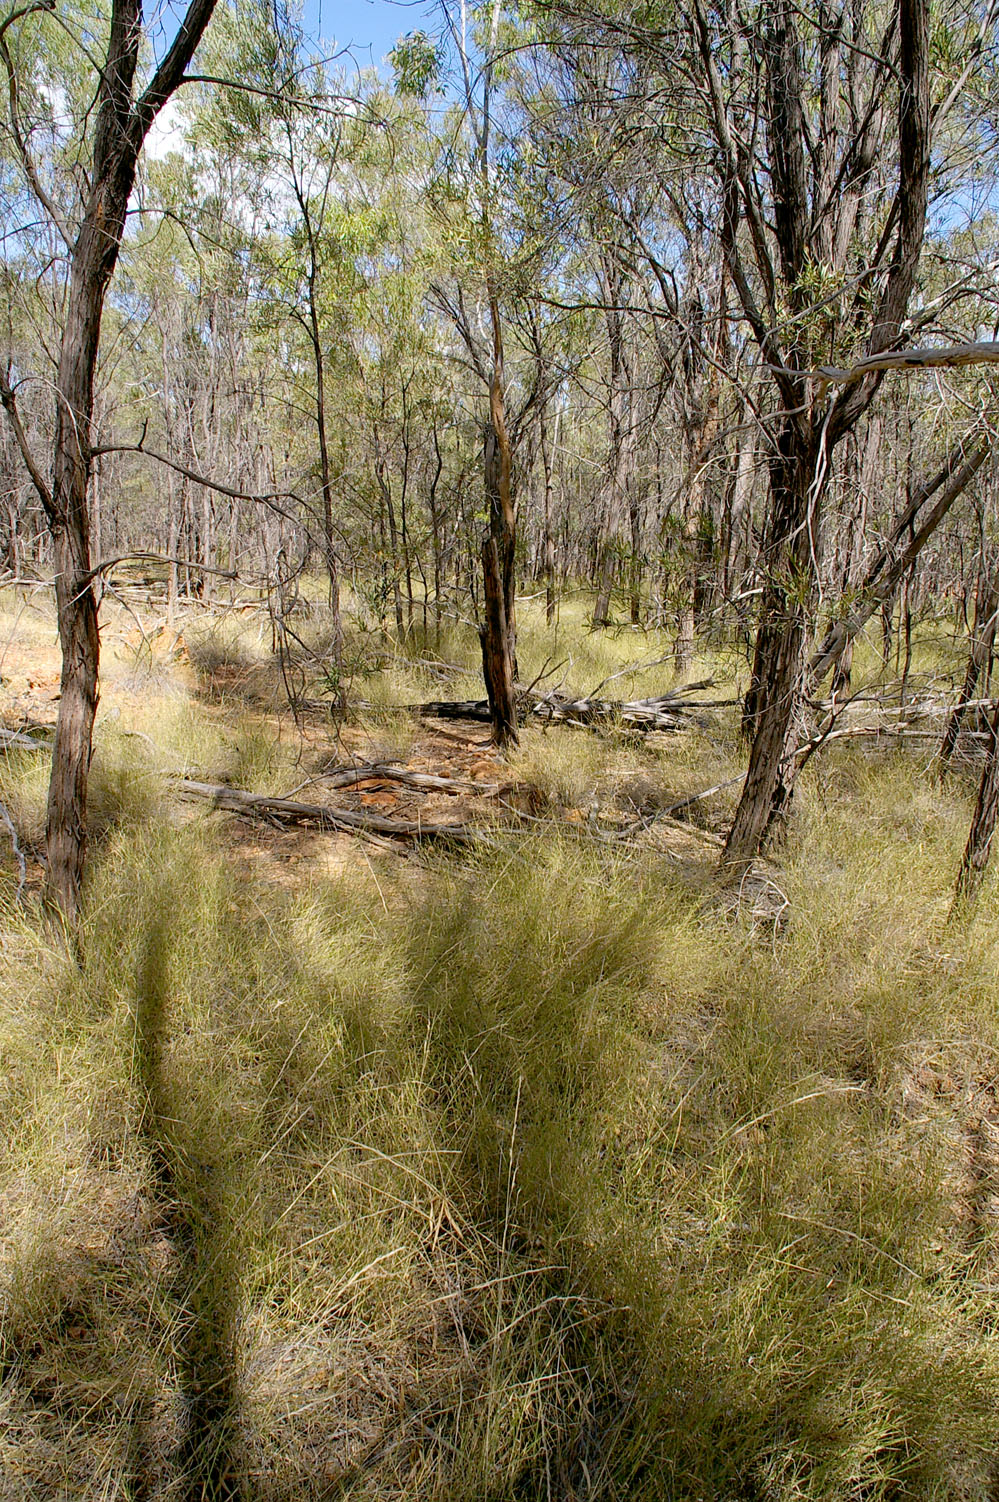 Fig. 10. Lancewood (Acacia shirelyii) community with Cleistochloa subjuncea in ground layer (PHOTO: RJ Cummings d42676a).